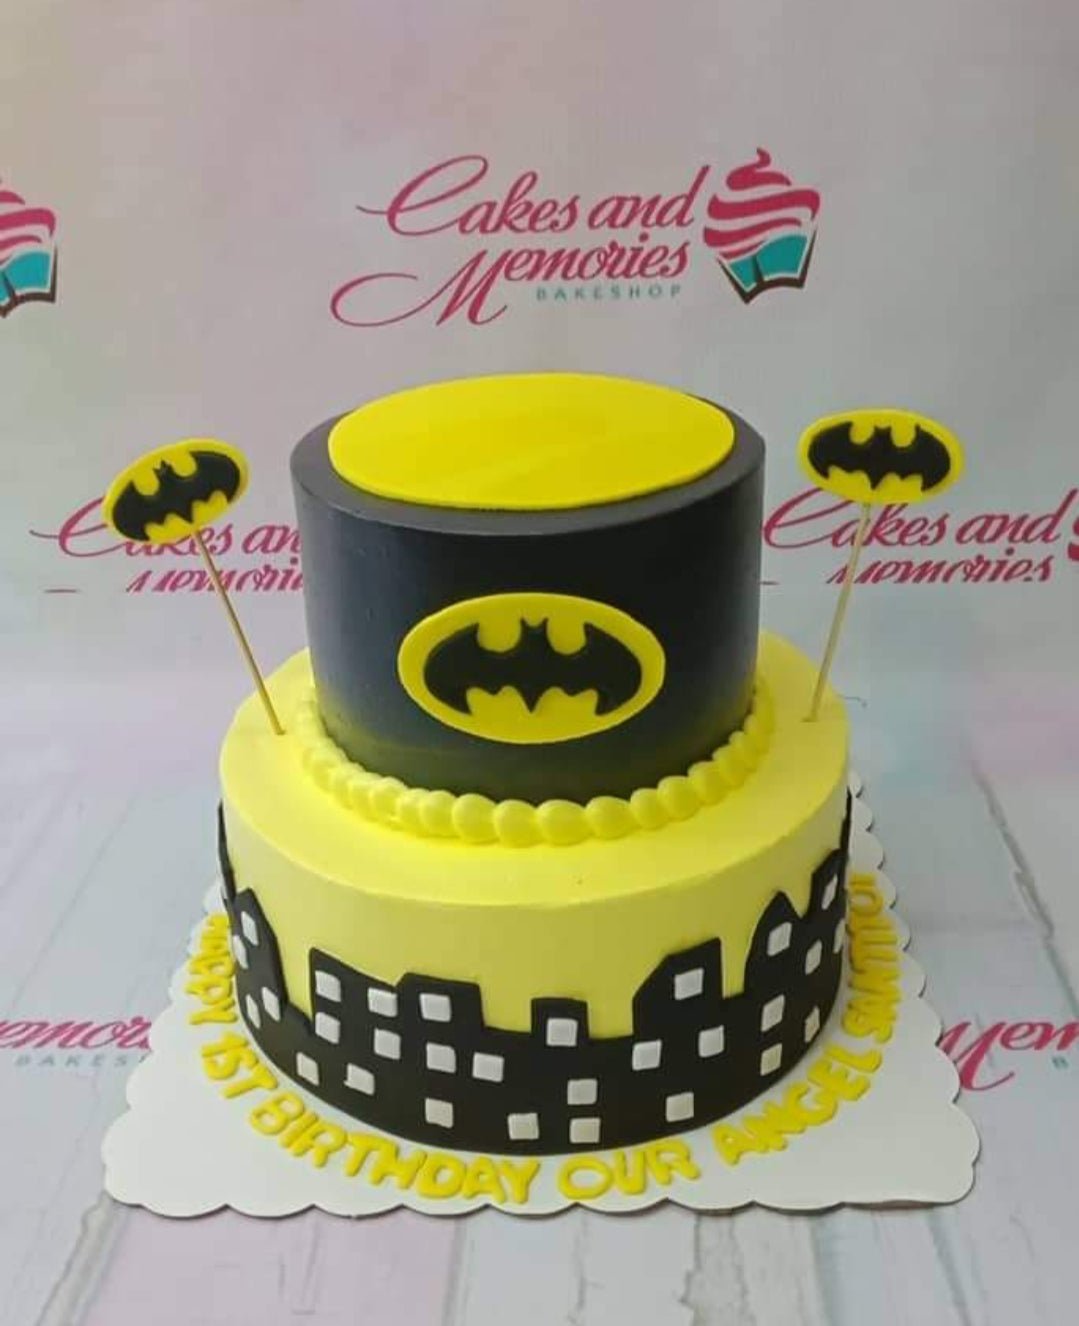 Rosemary's Home Made Treats - 2 Layer Batman Themed Cake for Roshin James  #2LayerCake #Batman #Cake #Black #Yellow ==================== For orders  please call or Viber us at 0917-598-9215 or 0925-545-7510 Message us: